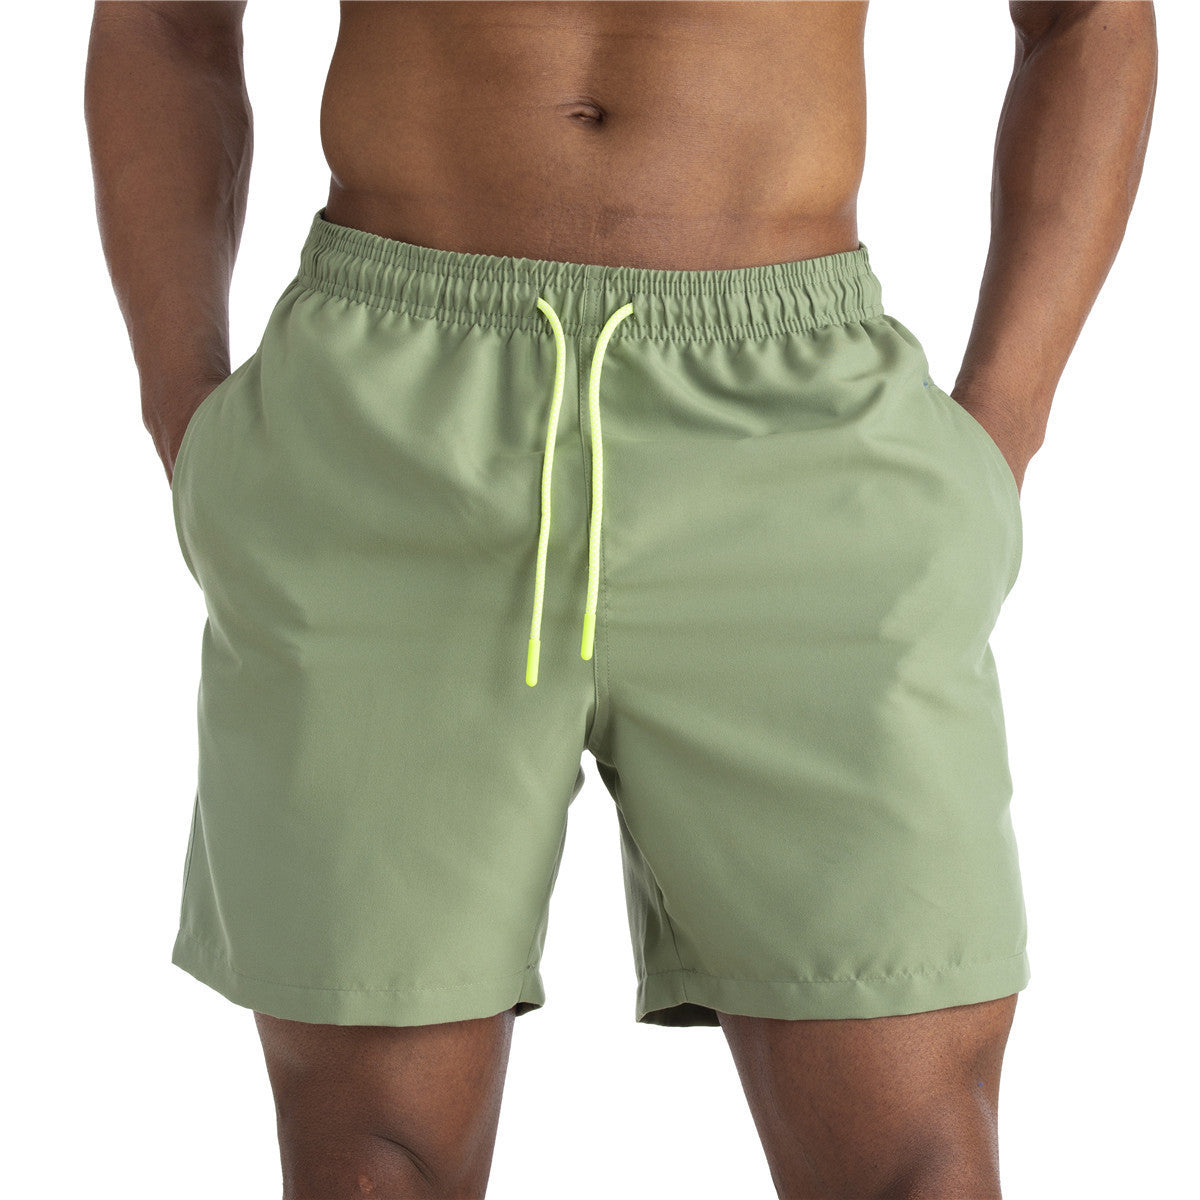 Men's Beach Shorts with String